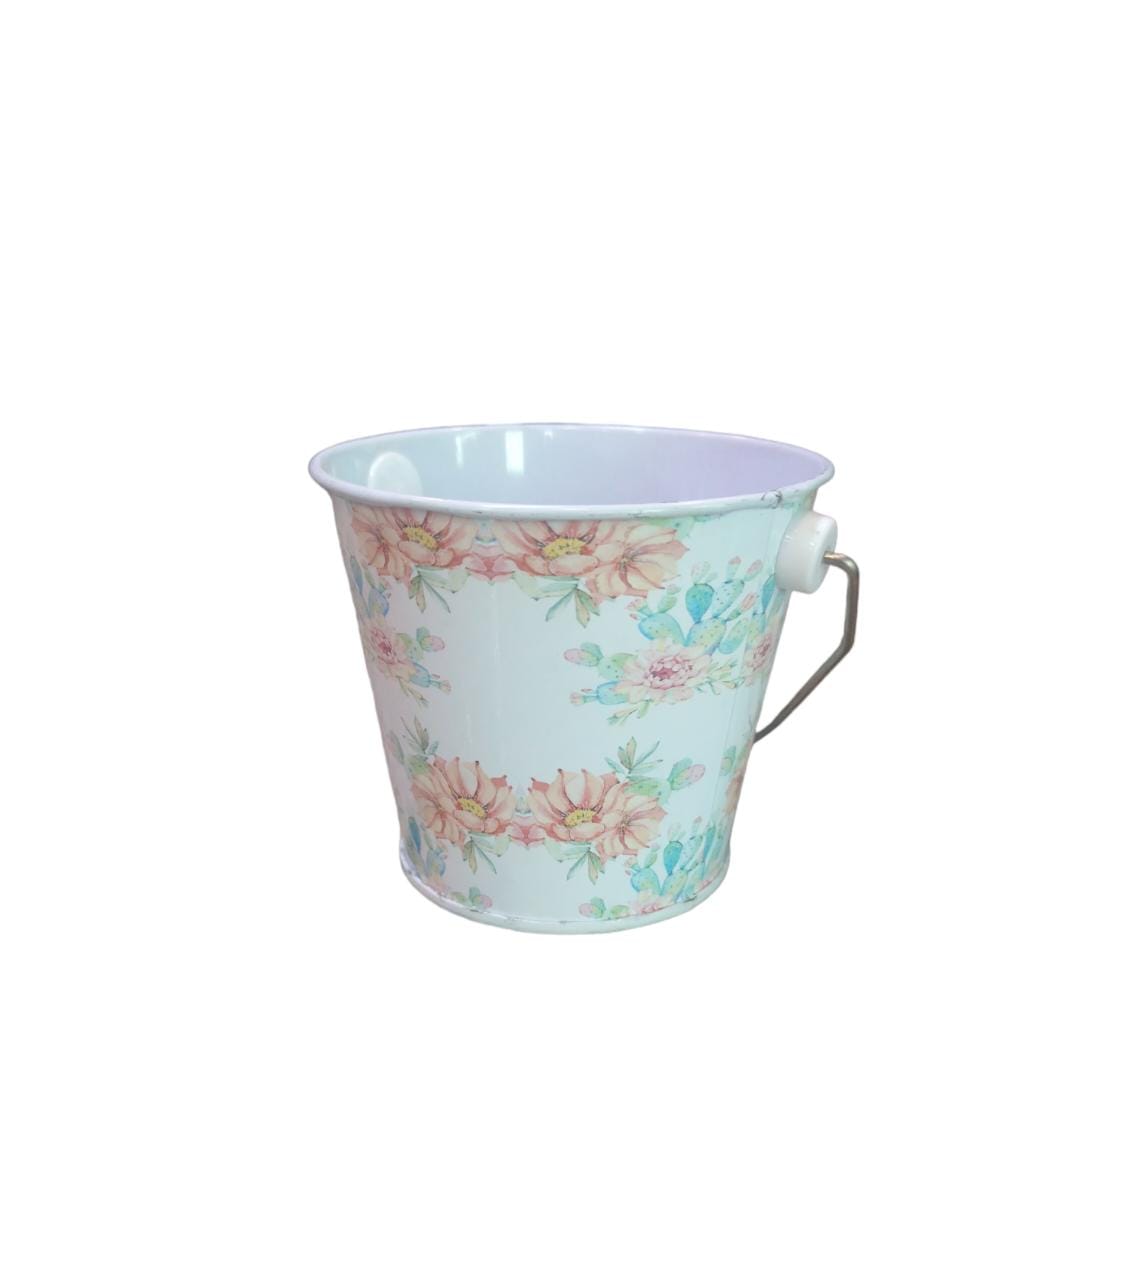 Mini Iron Bucket 8x7cm with White Flower Print with Handle